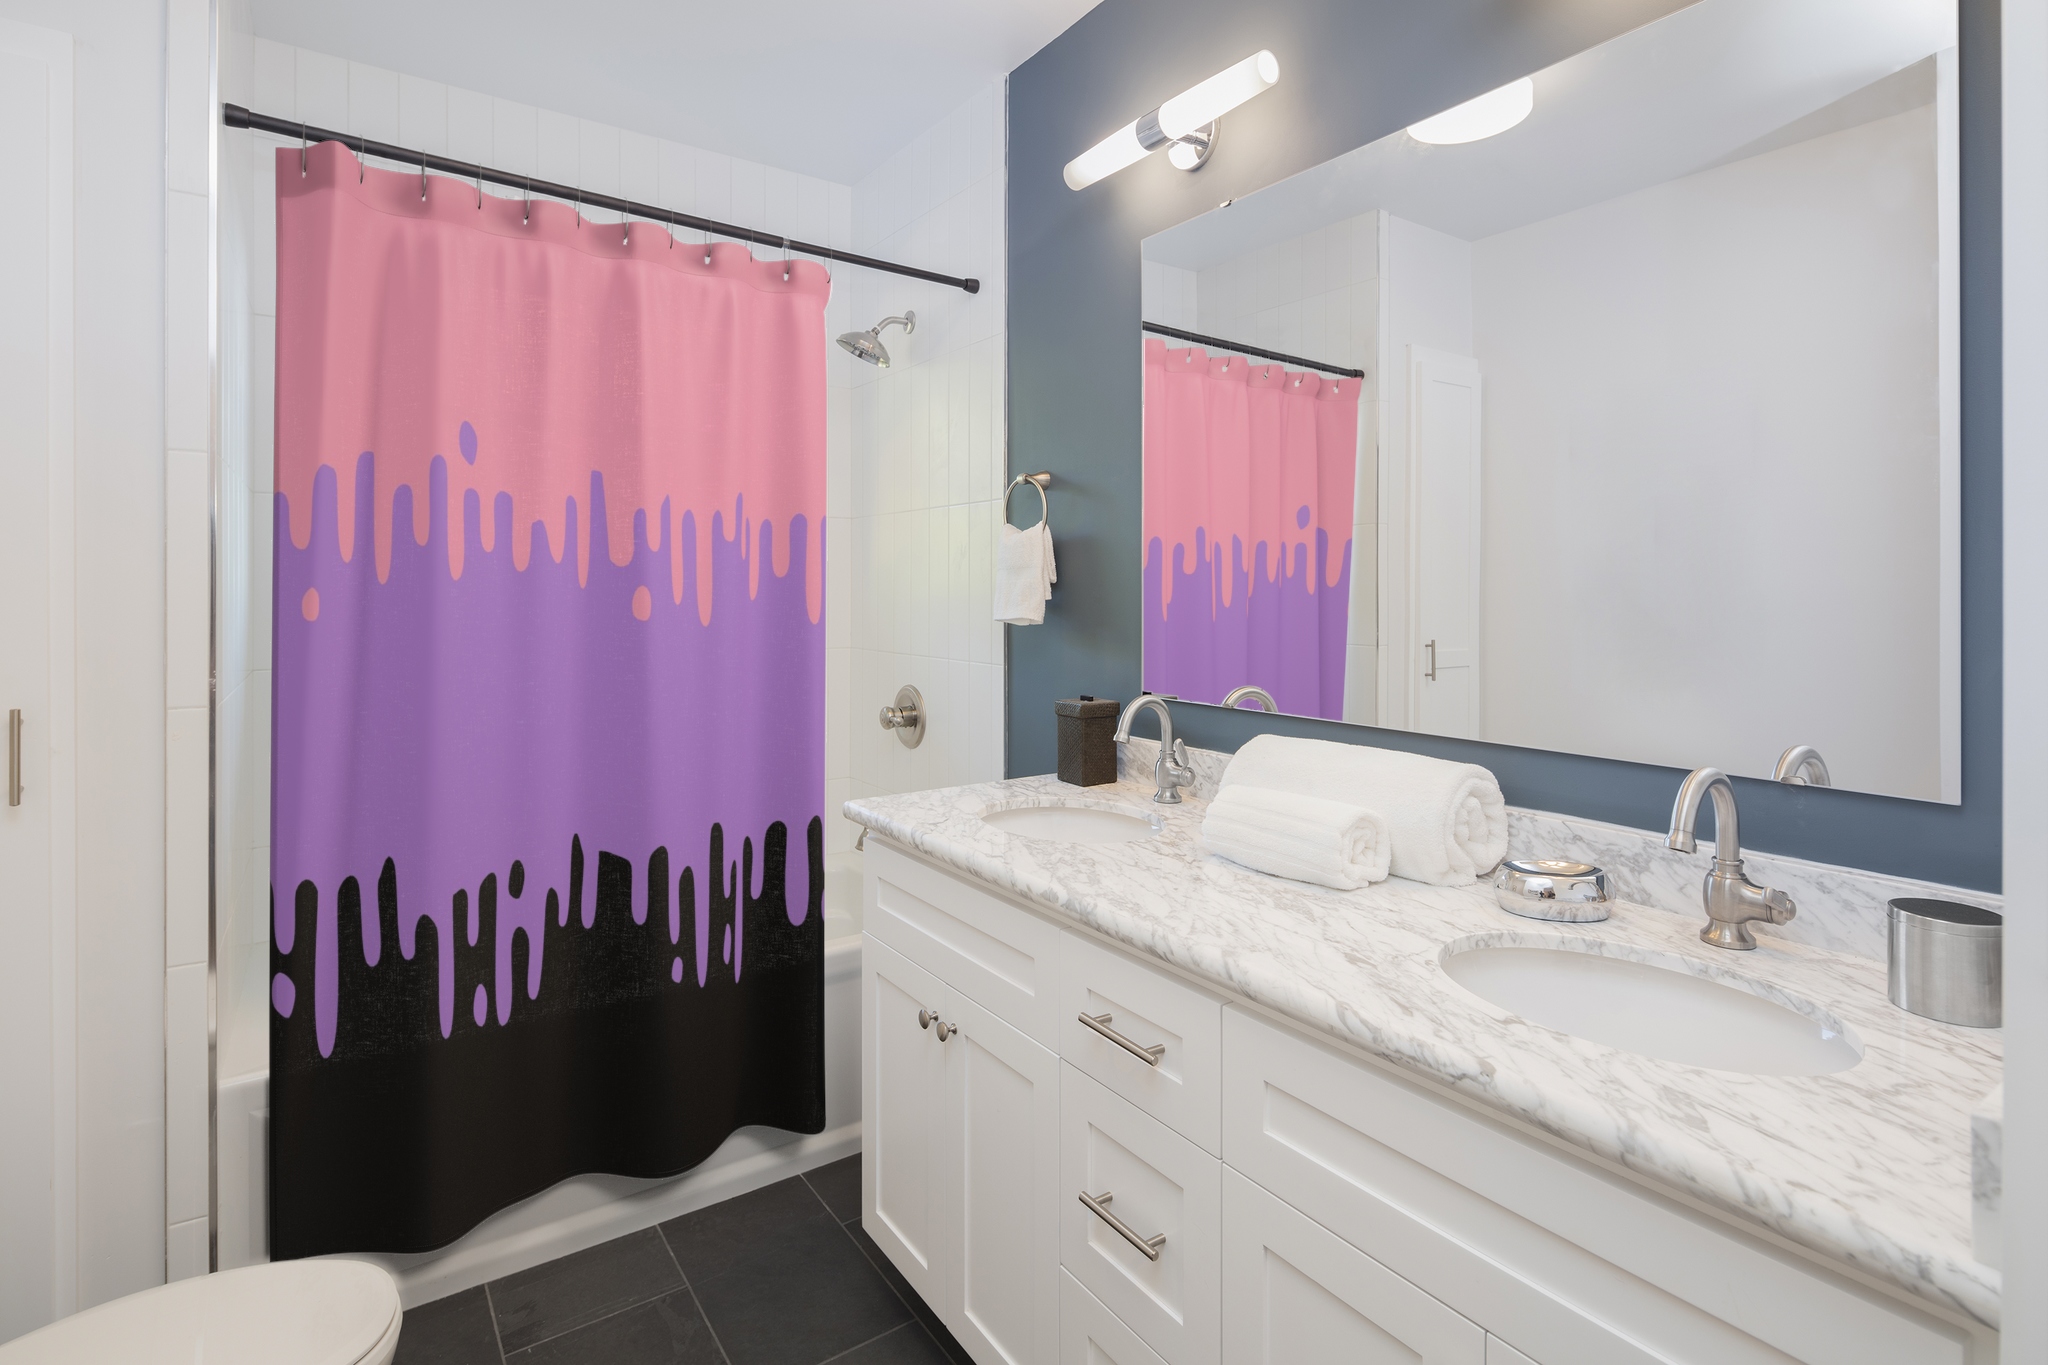 Pastel Slime Drips Shower Curtain -